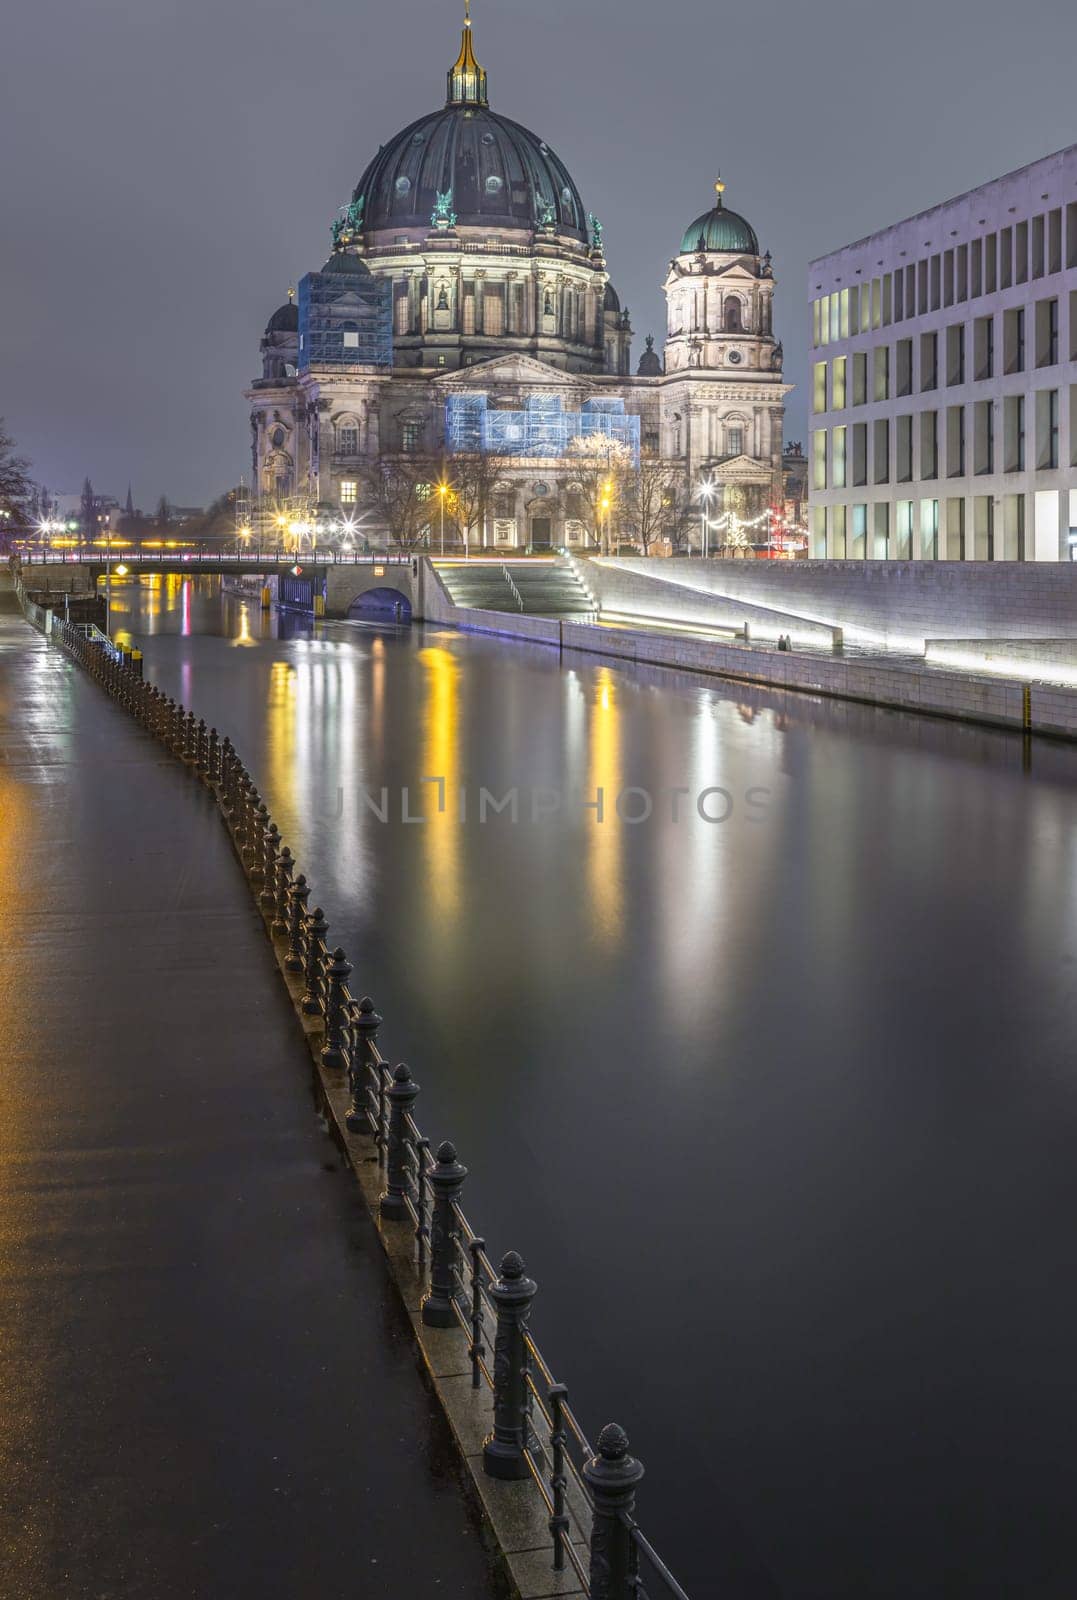 The berlin cathedral building with a bridge over the river Spree at dusk. by tosirikul